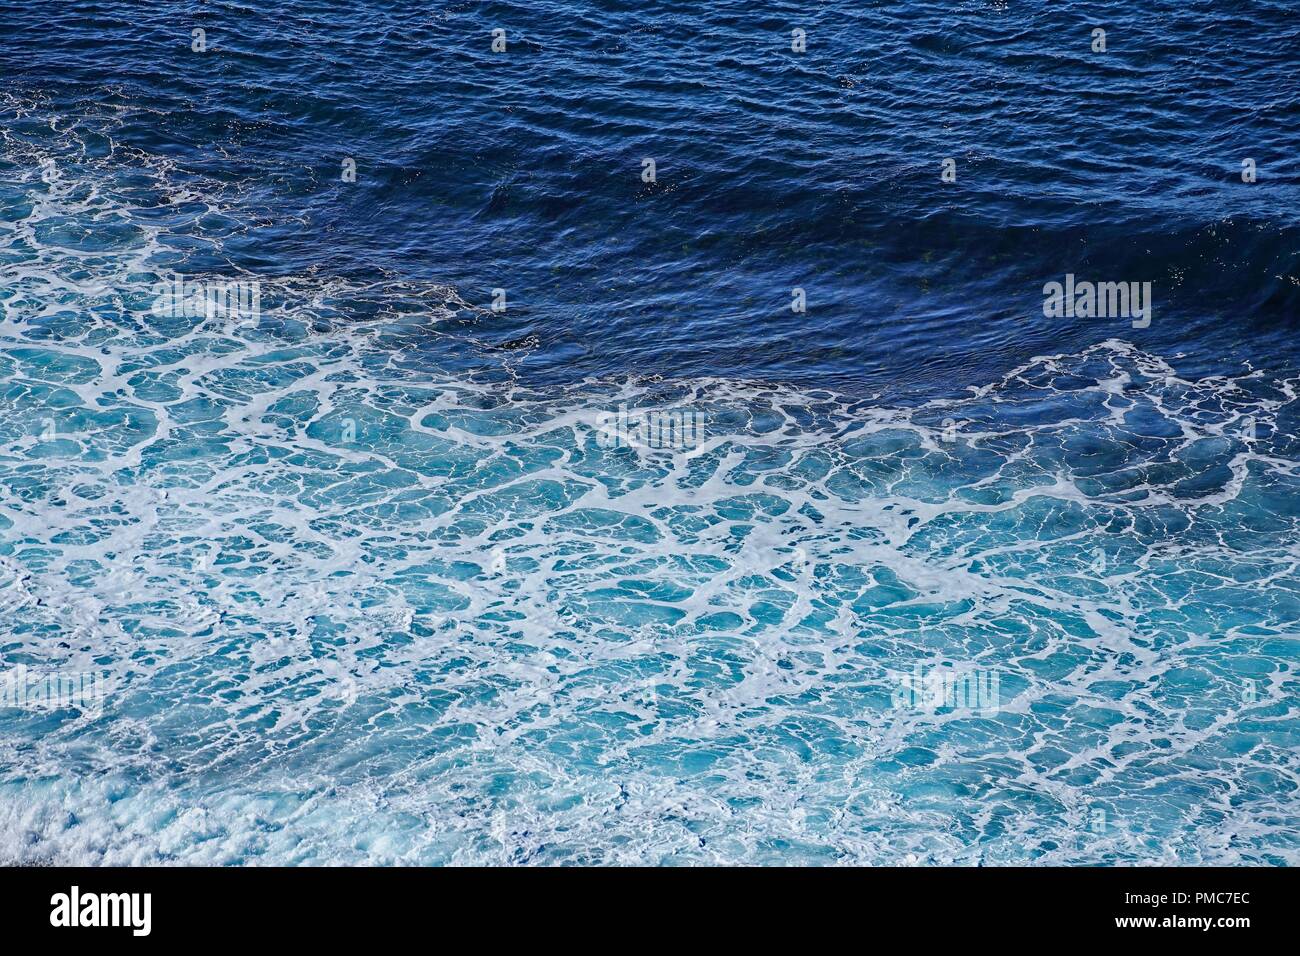 Seafoam and water, viewed from above and closeup. Stock Photo